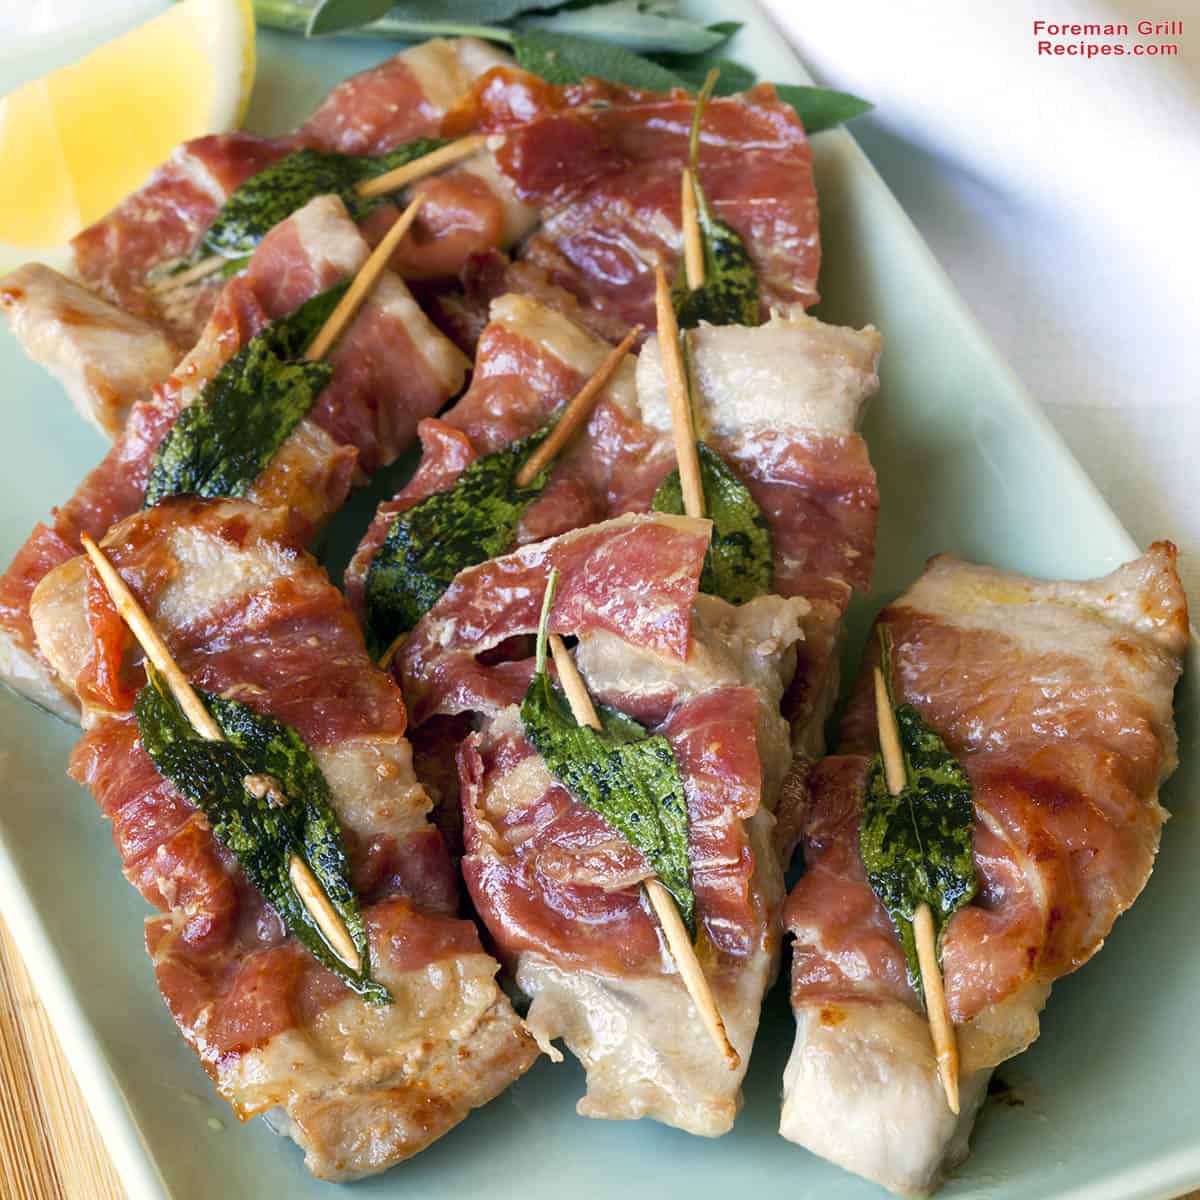 Grilled Veal Saltimbocca on a foreman grill